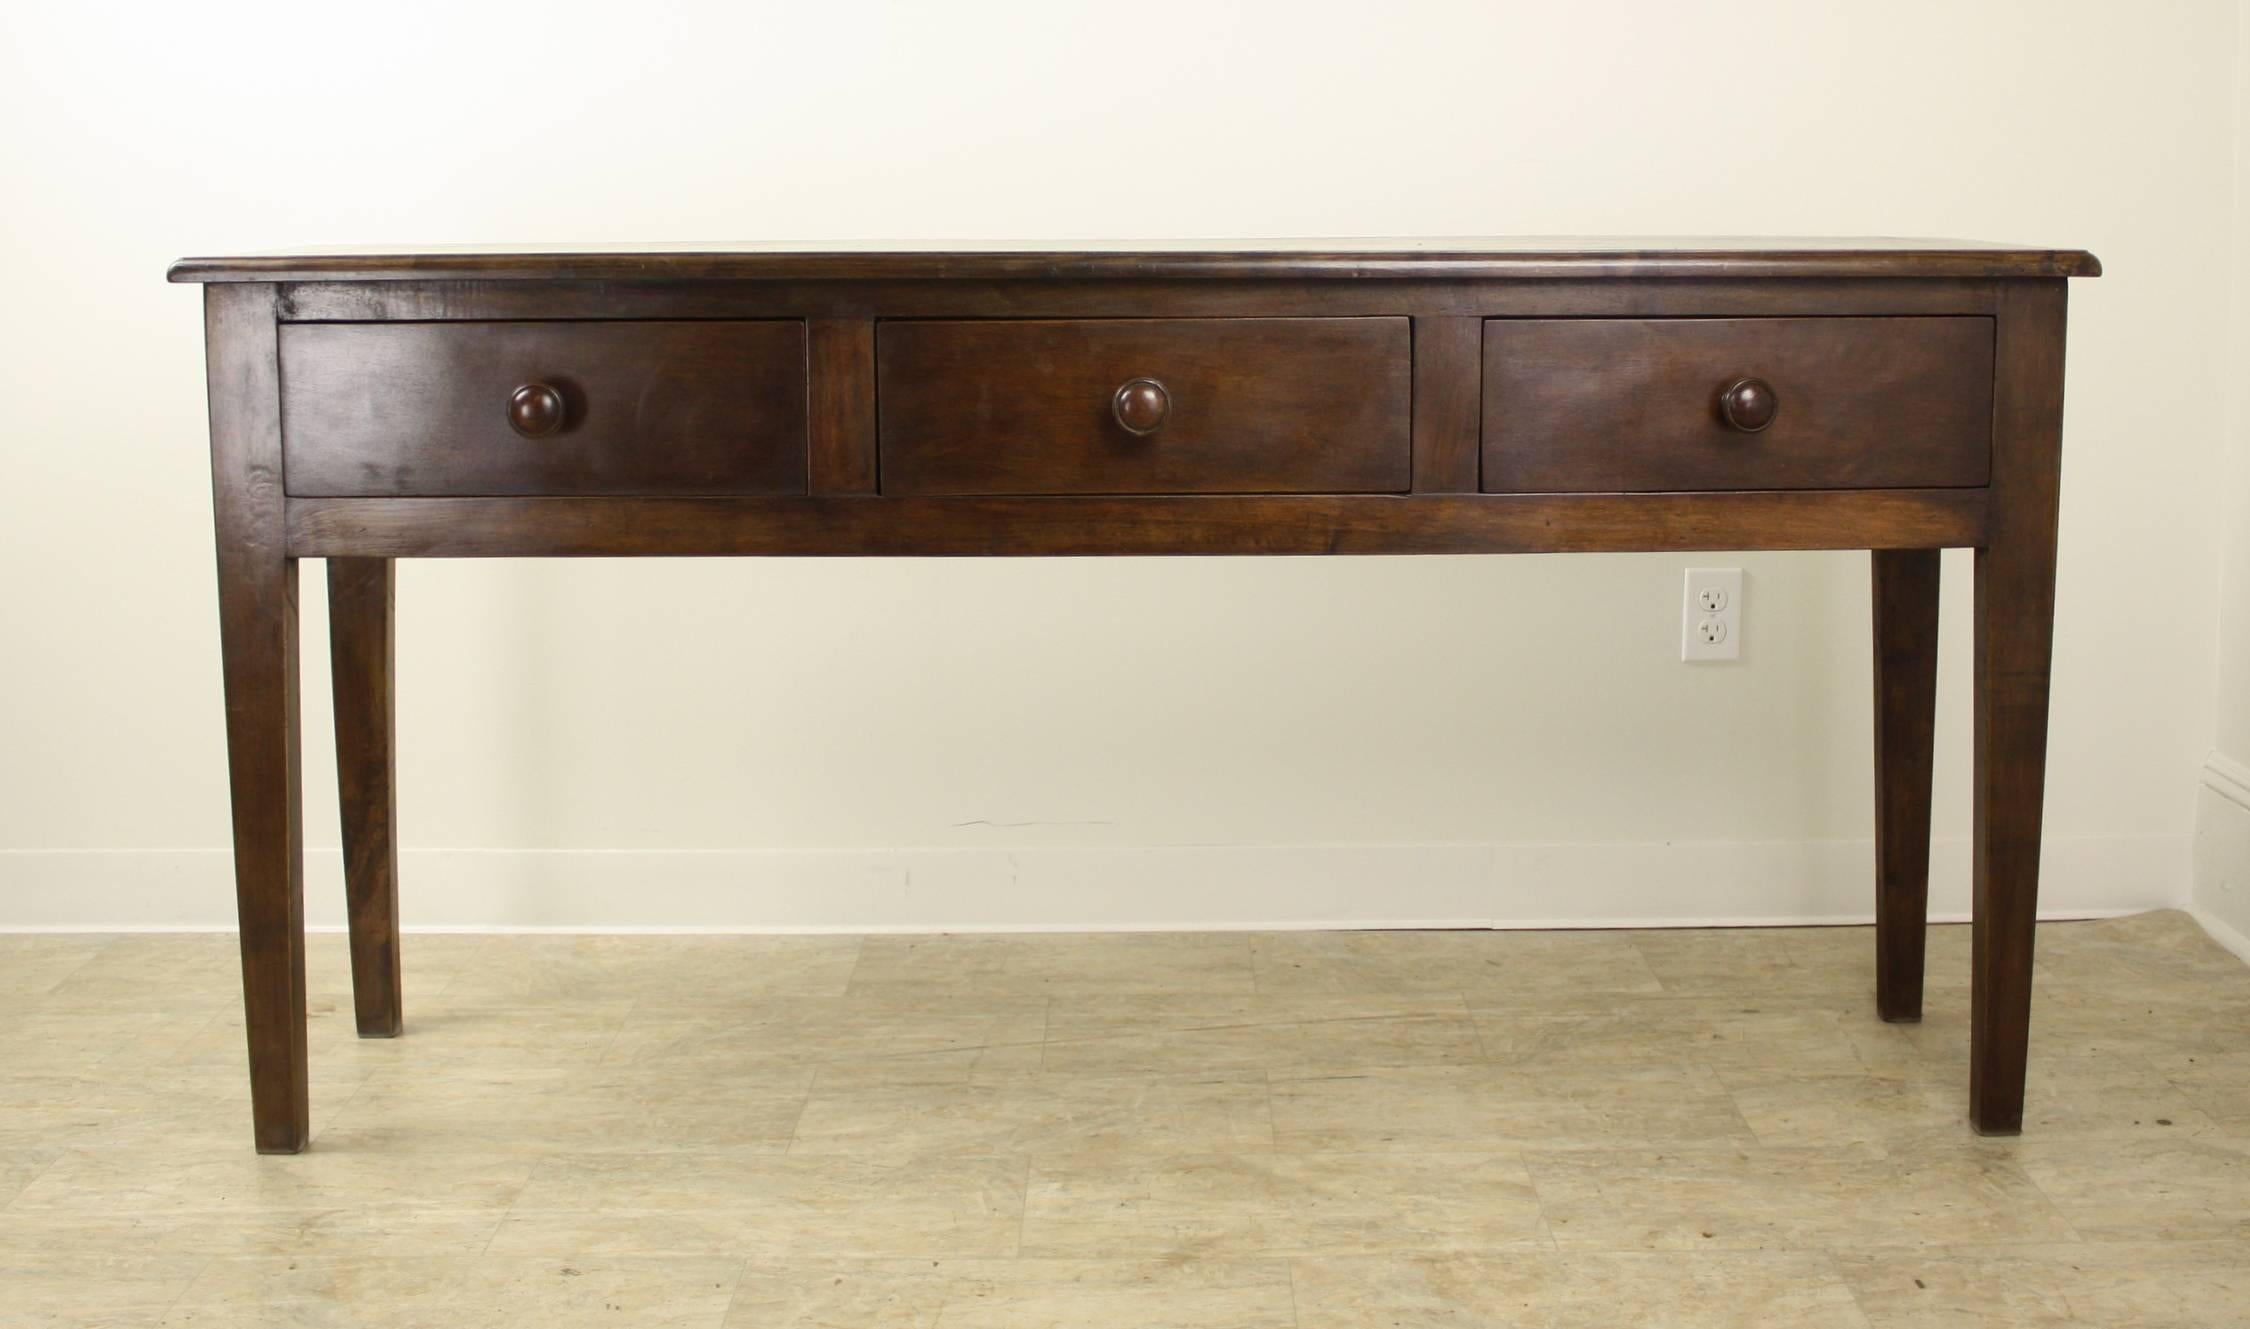 This handsome piece boasts the Classic three-drawer style on sturdy, slightly tapered legs.. At 15.25